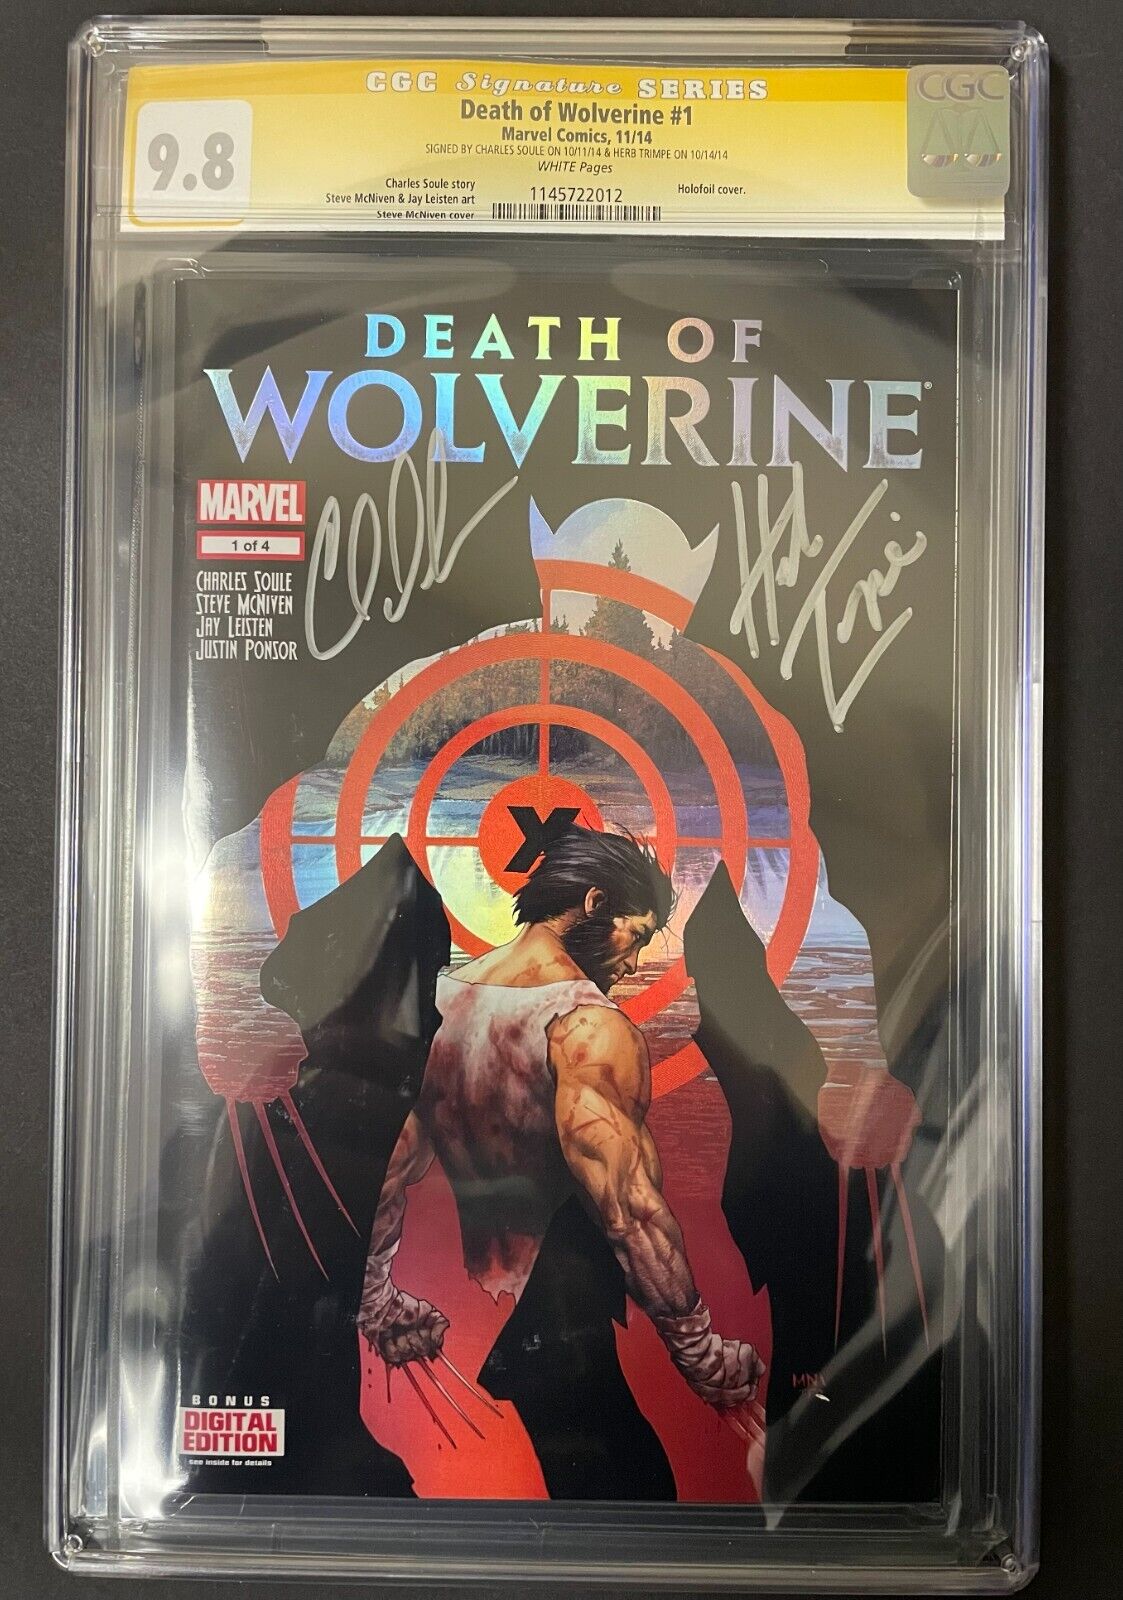 Death of Wolverine #1 CGC 9.8 Holofoil - Signed by Charles Soule and Herb Trimpe